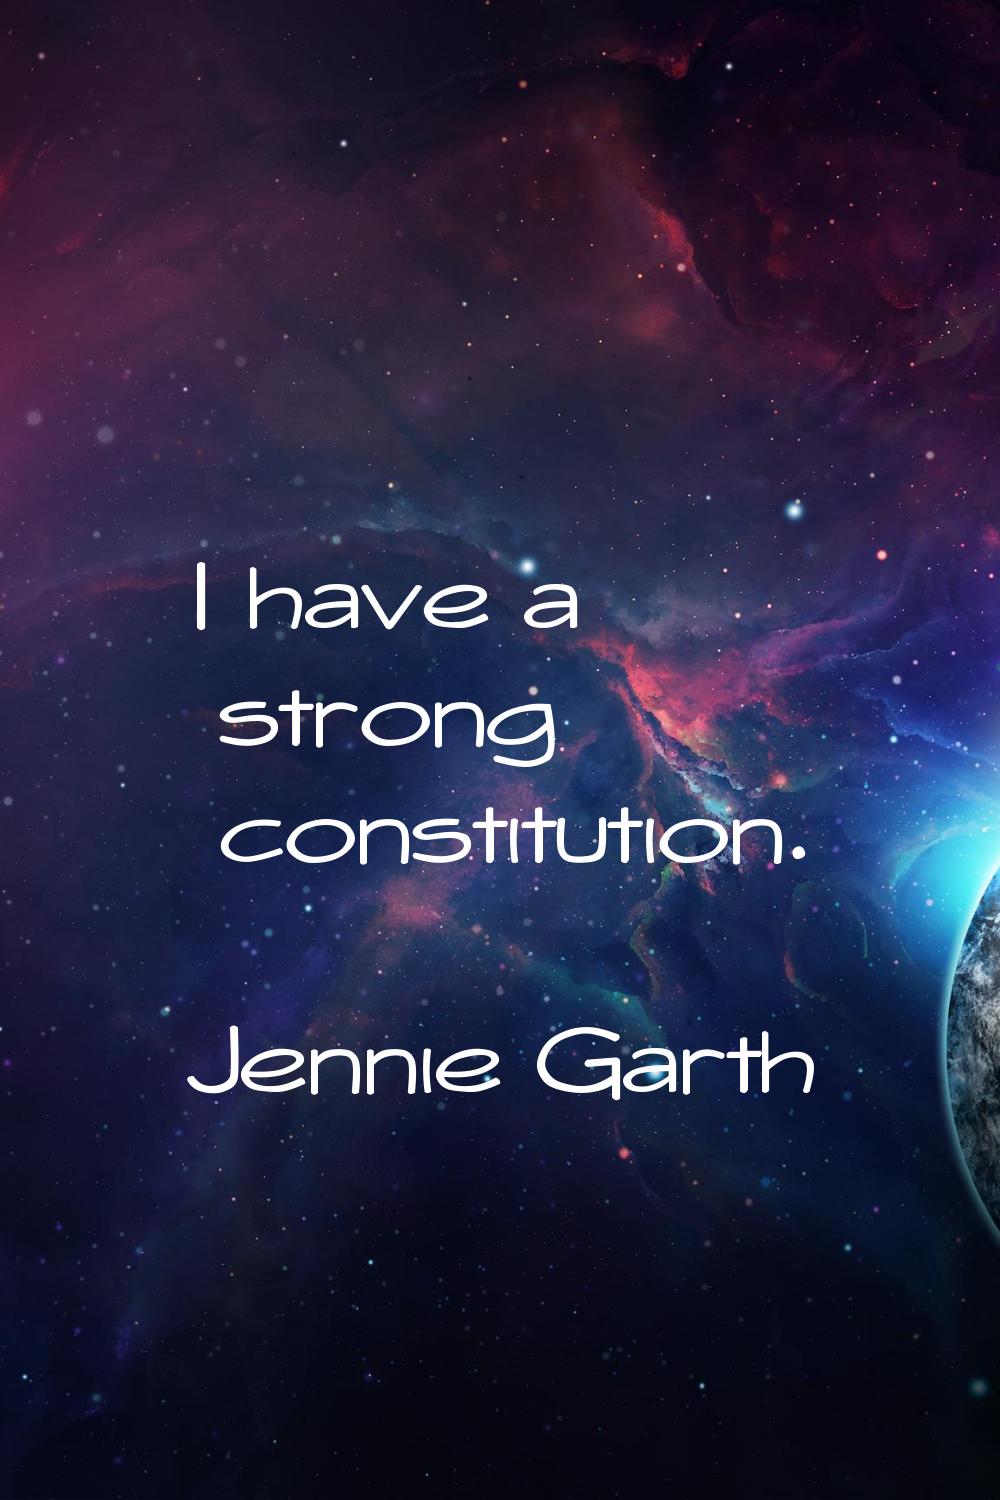 I have a strong constitution.